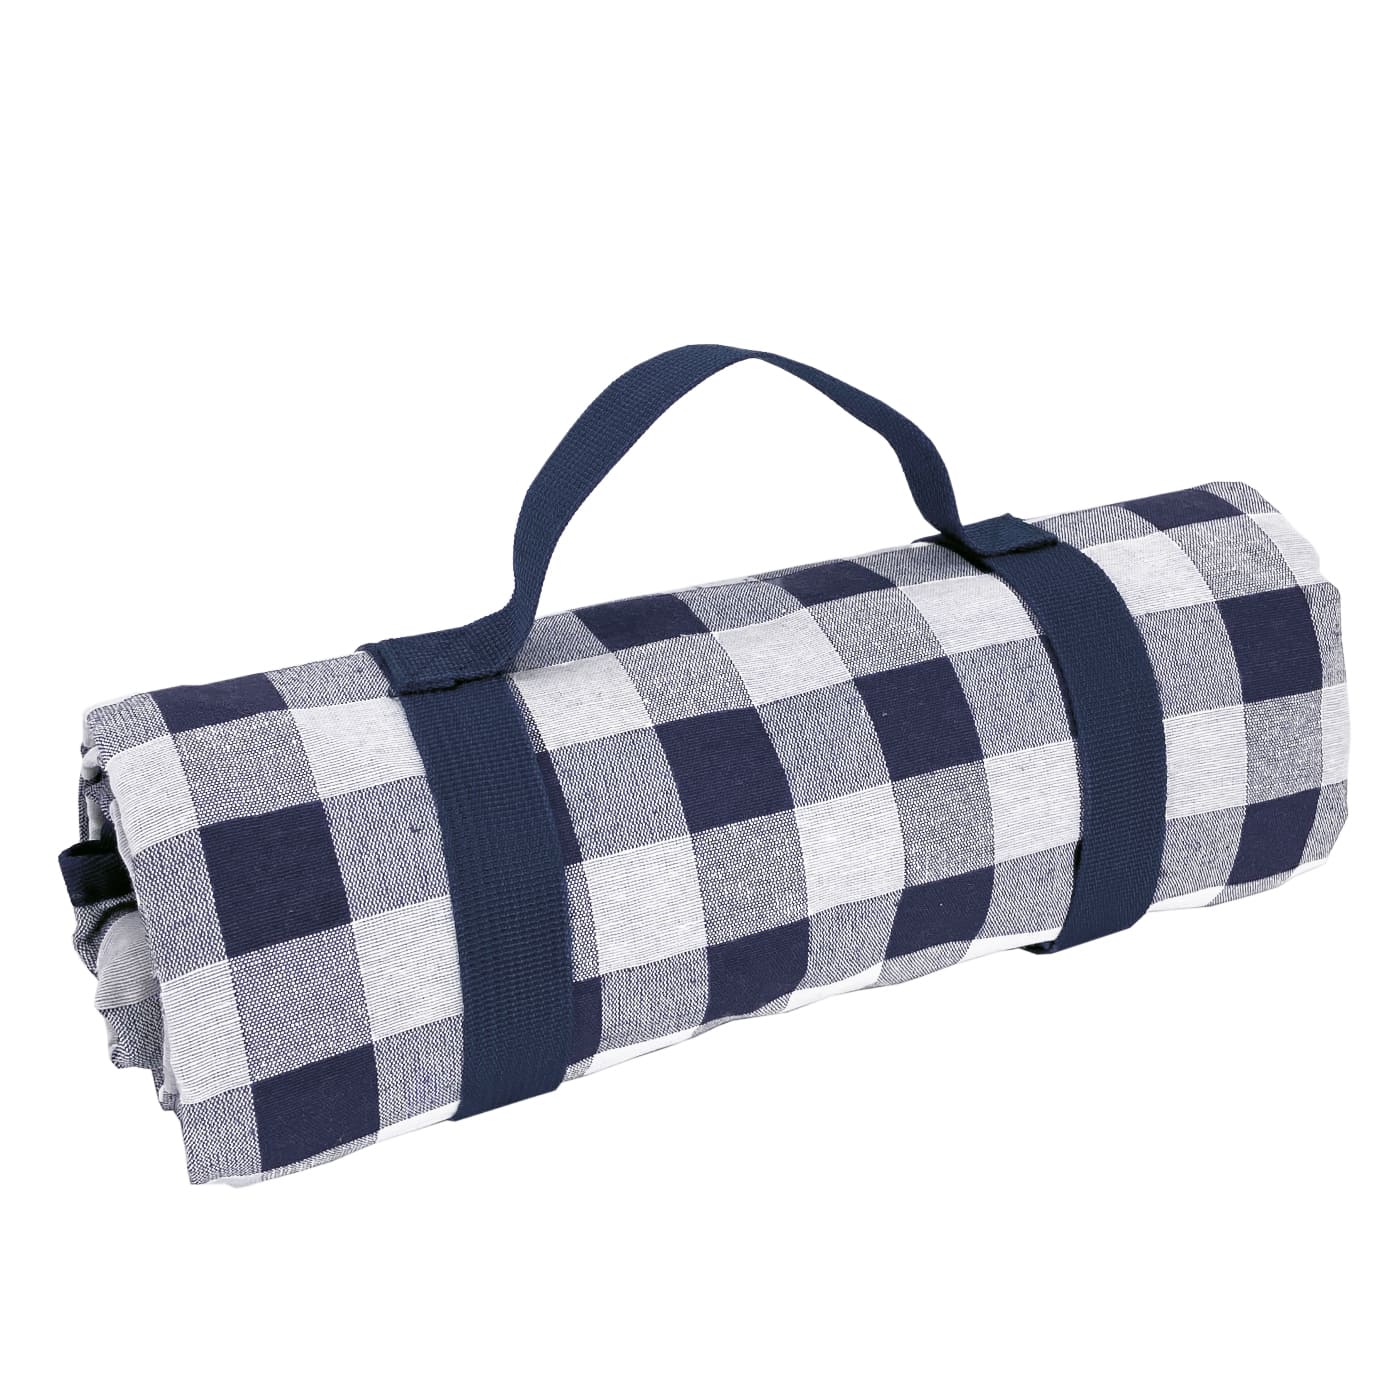 Waterproof picnic blanket white and blue tiles